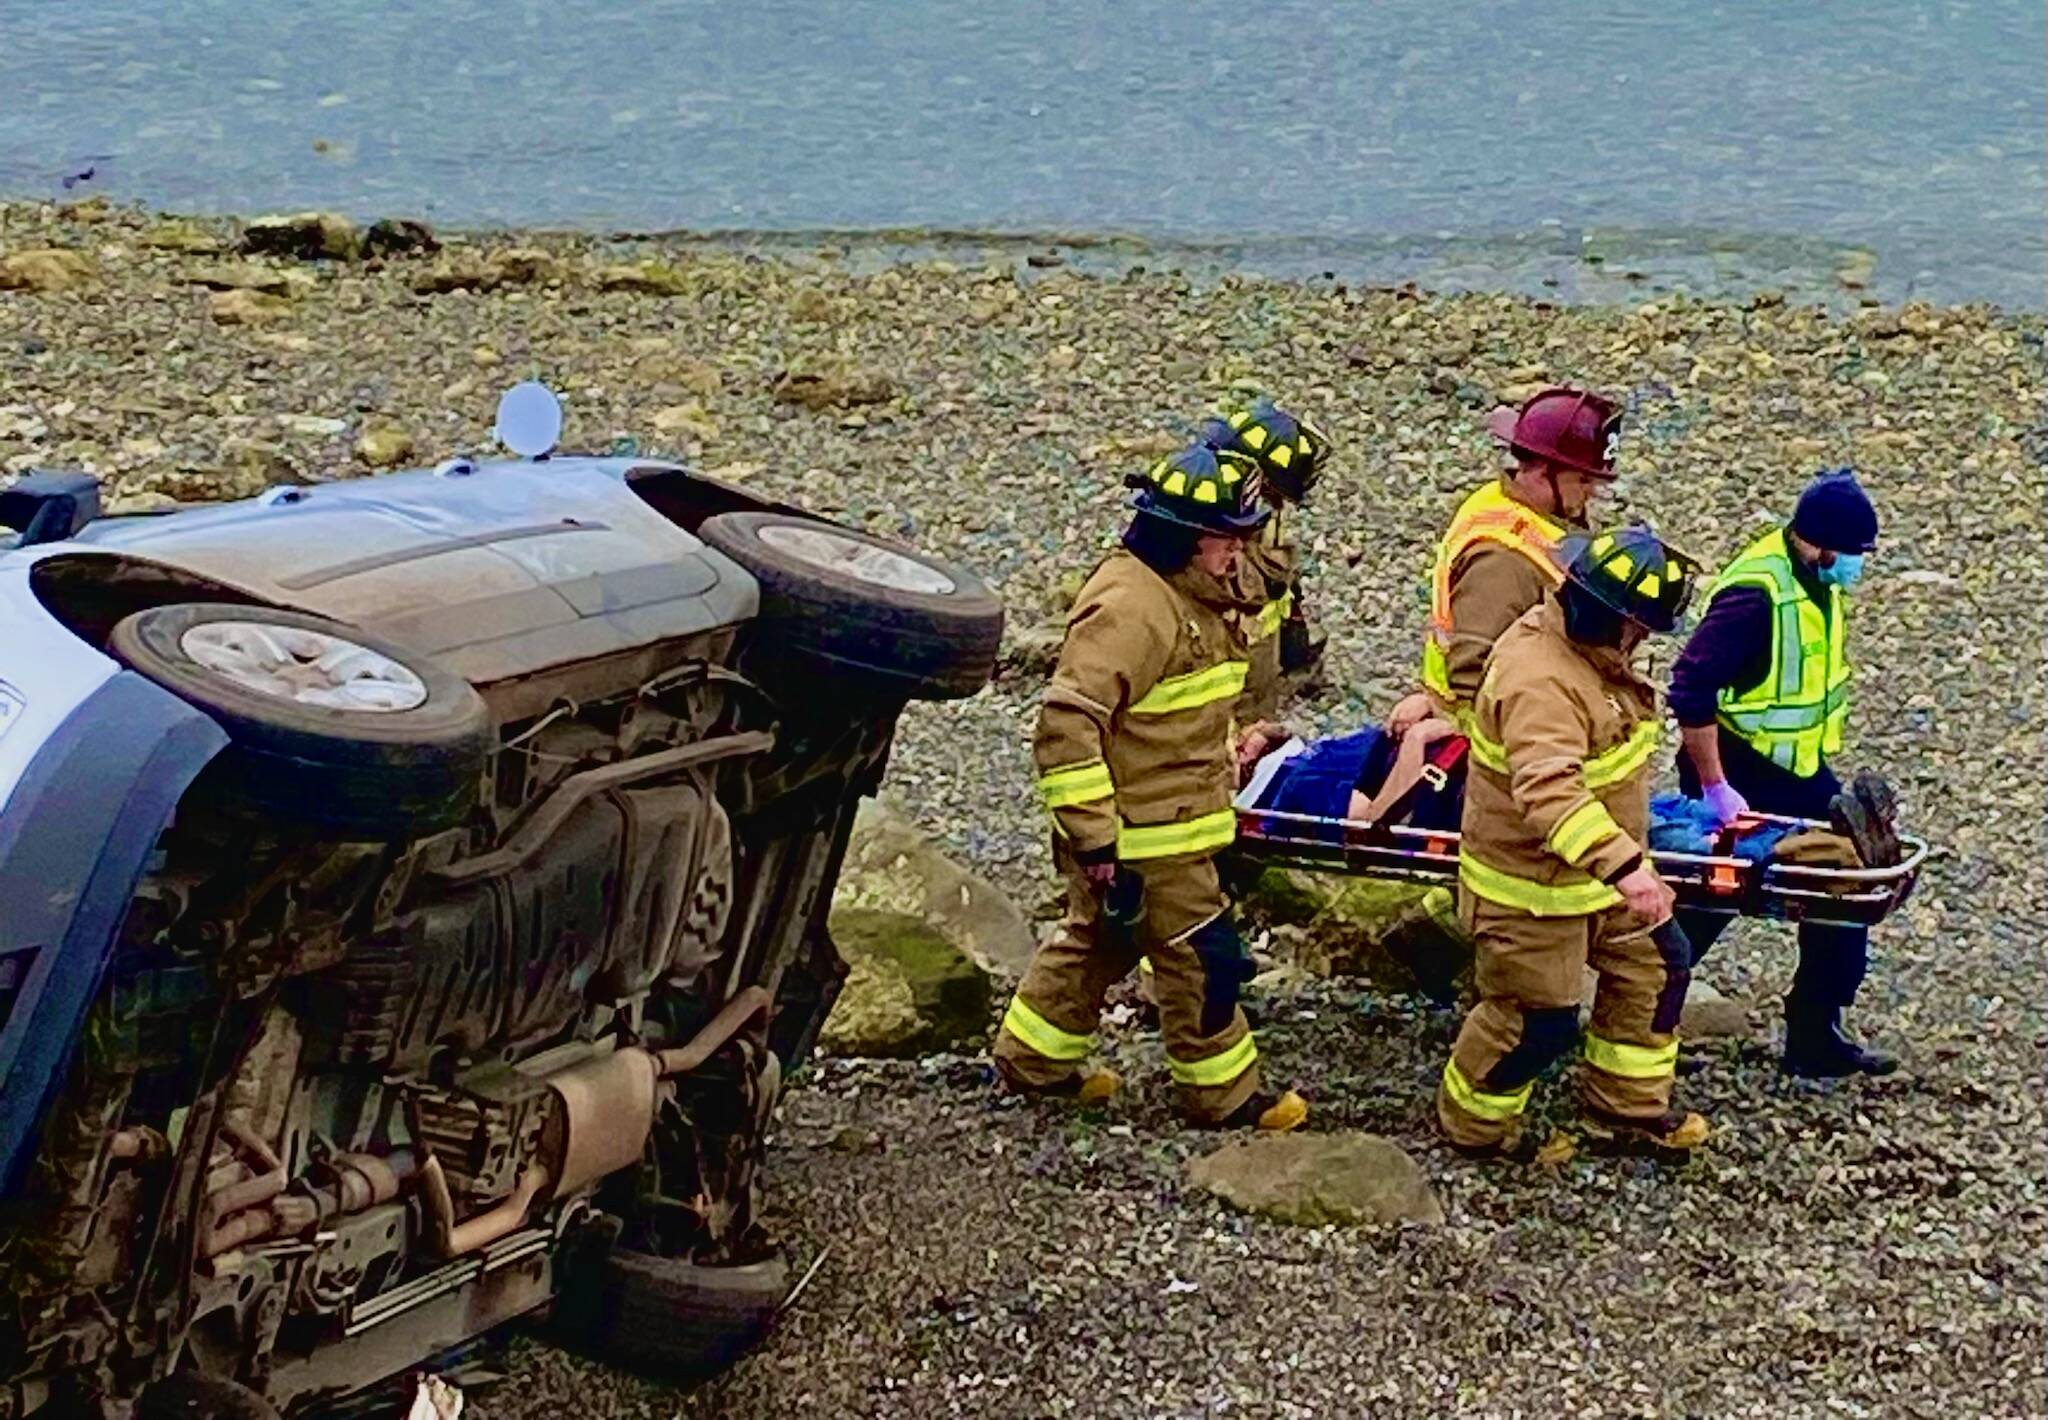 Firefighters carry a driver from the scene of a vehicle accident after the driver rolled his car near Penn Cove. (Photo provided)